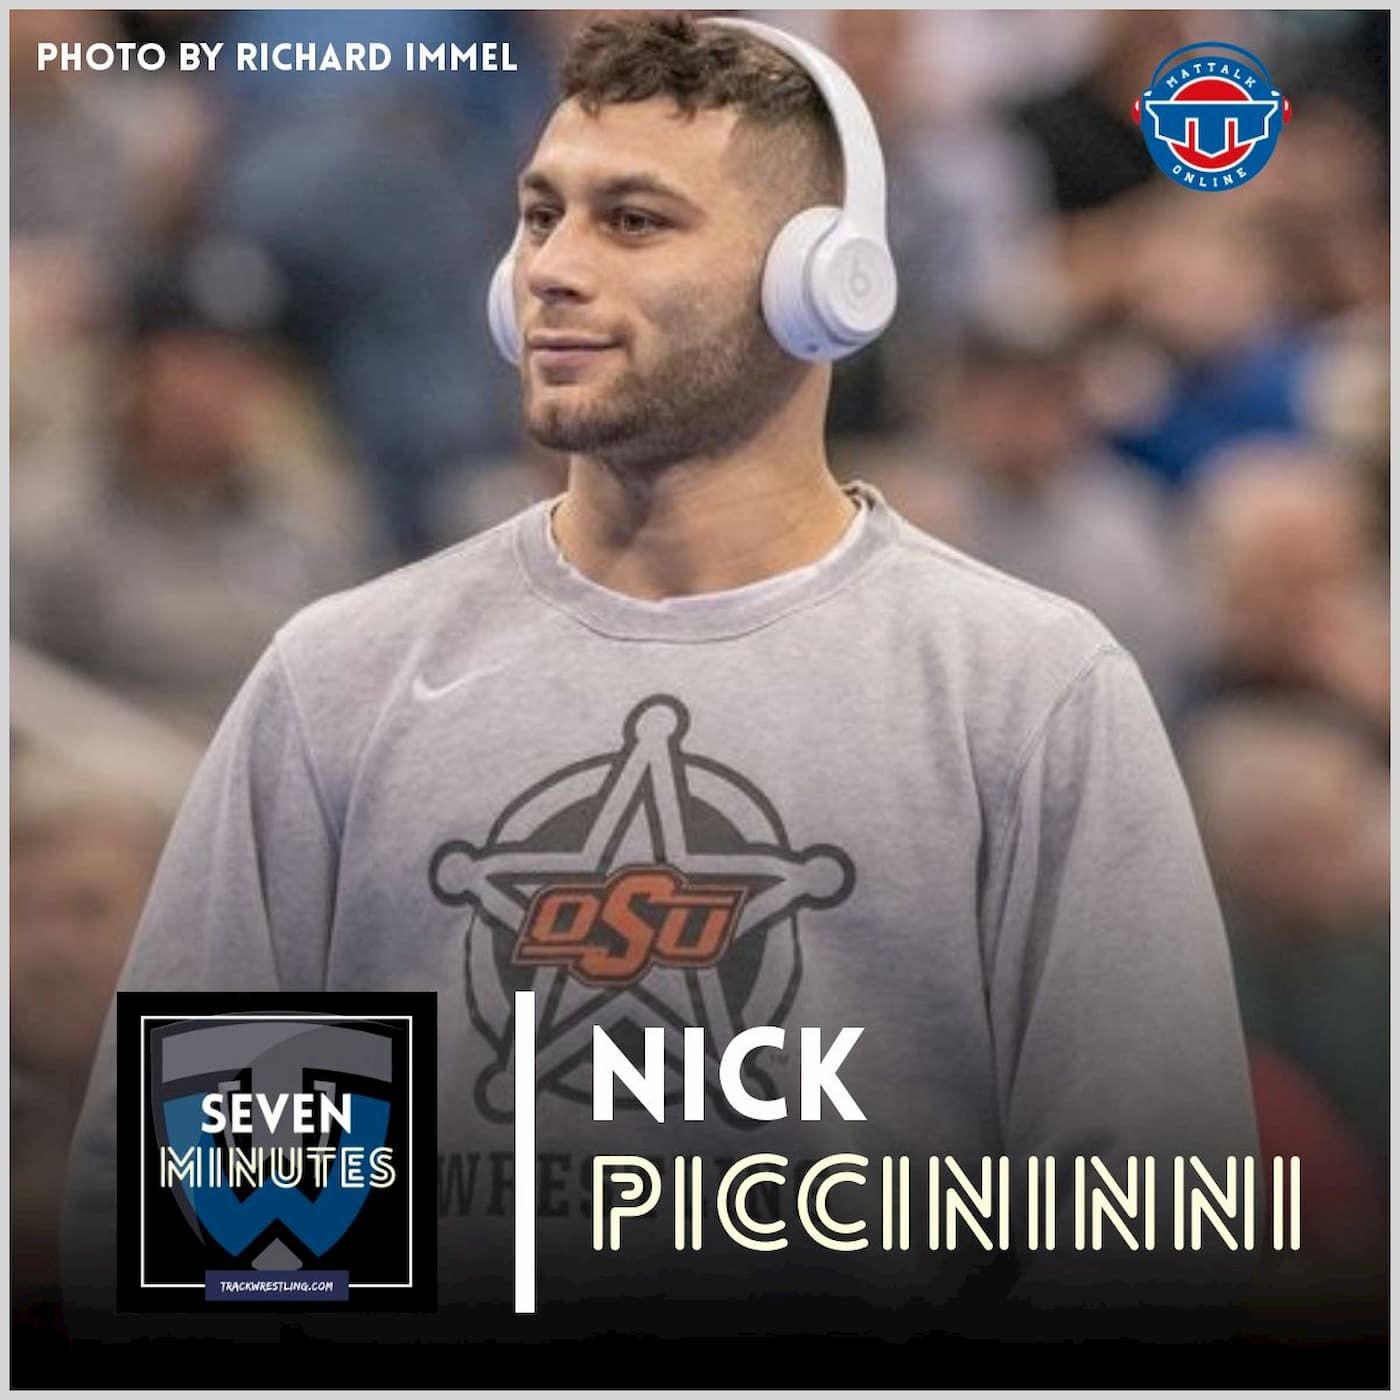 Seven Minutes with Oklahoma State's Nick Piccininni